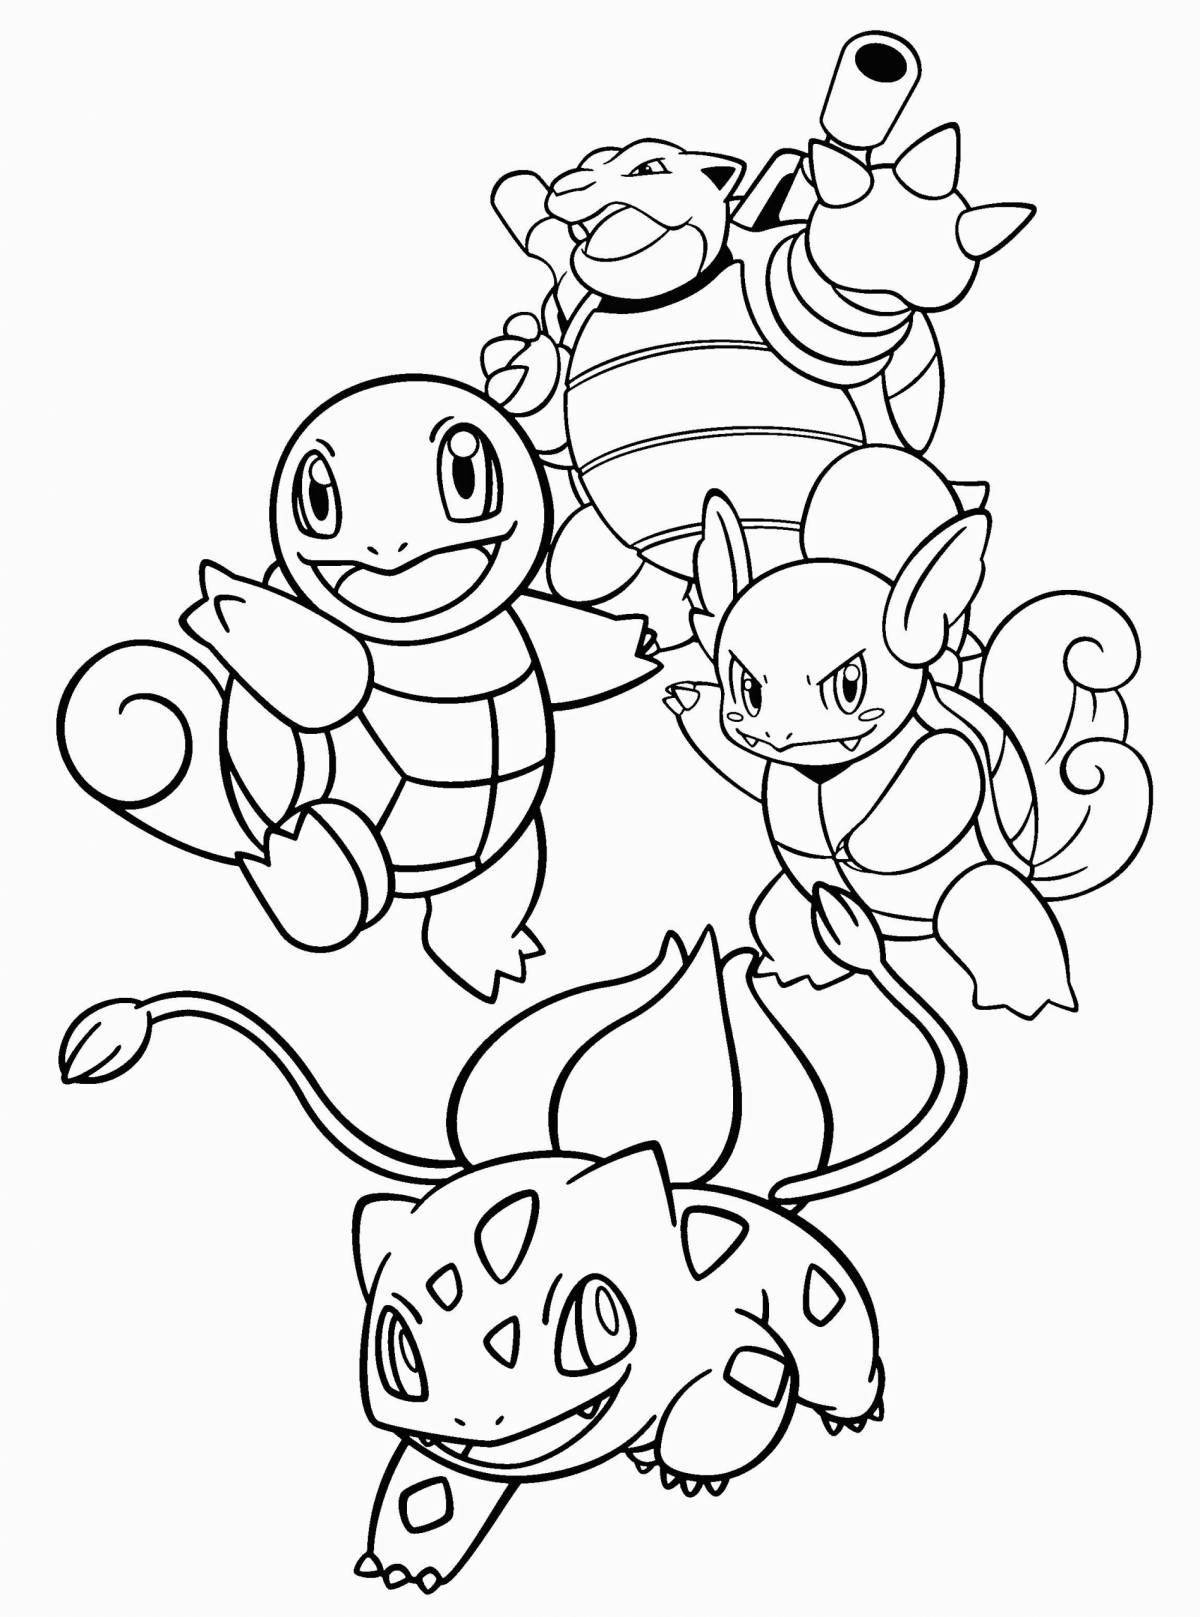 Amazing squirtle pokemon coloring page